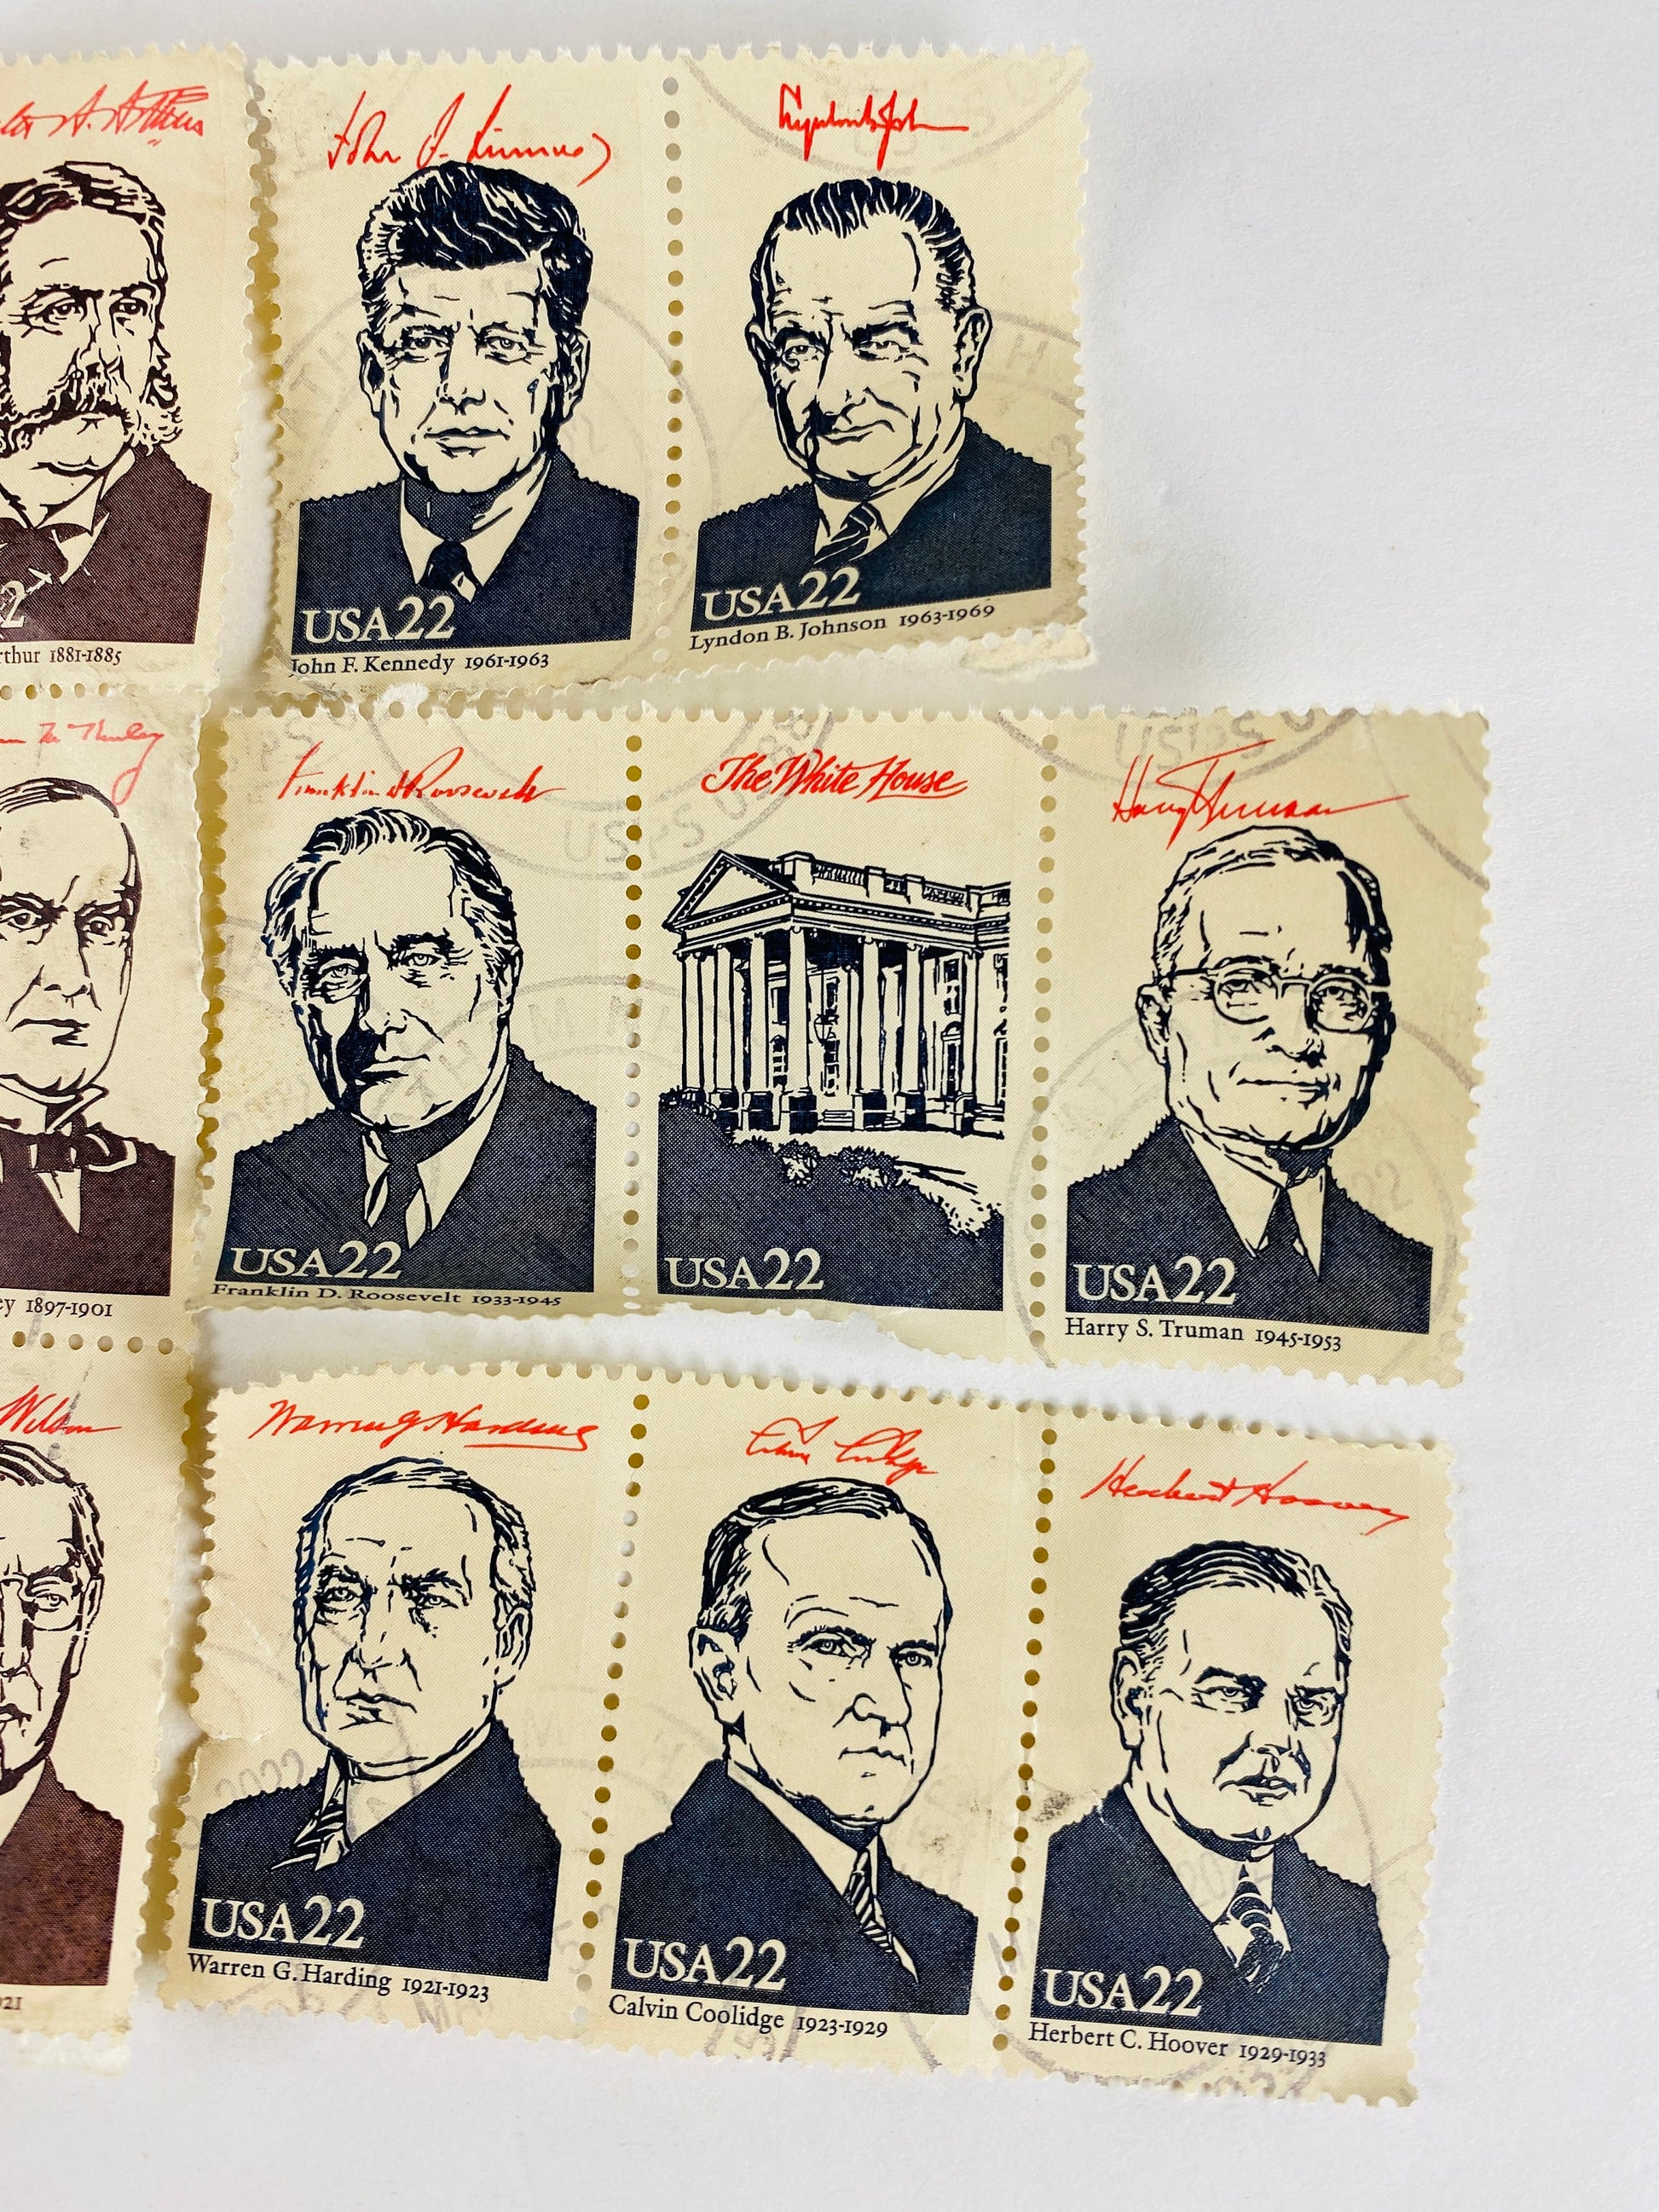 Lot of 17 commemorative stamps depicting a US President and the White House circa 1986 USED postage